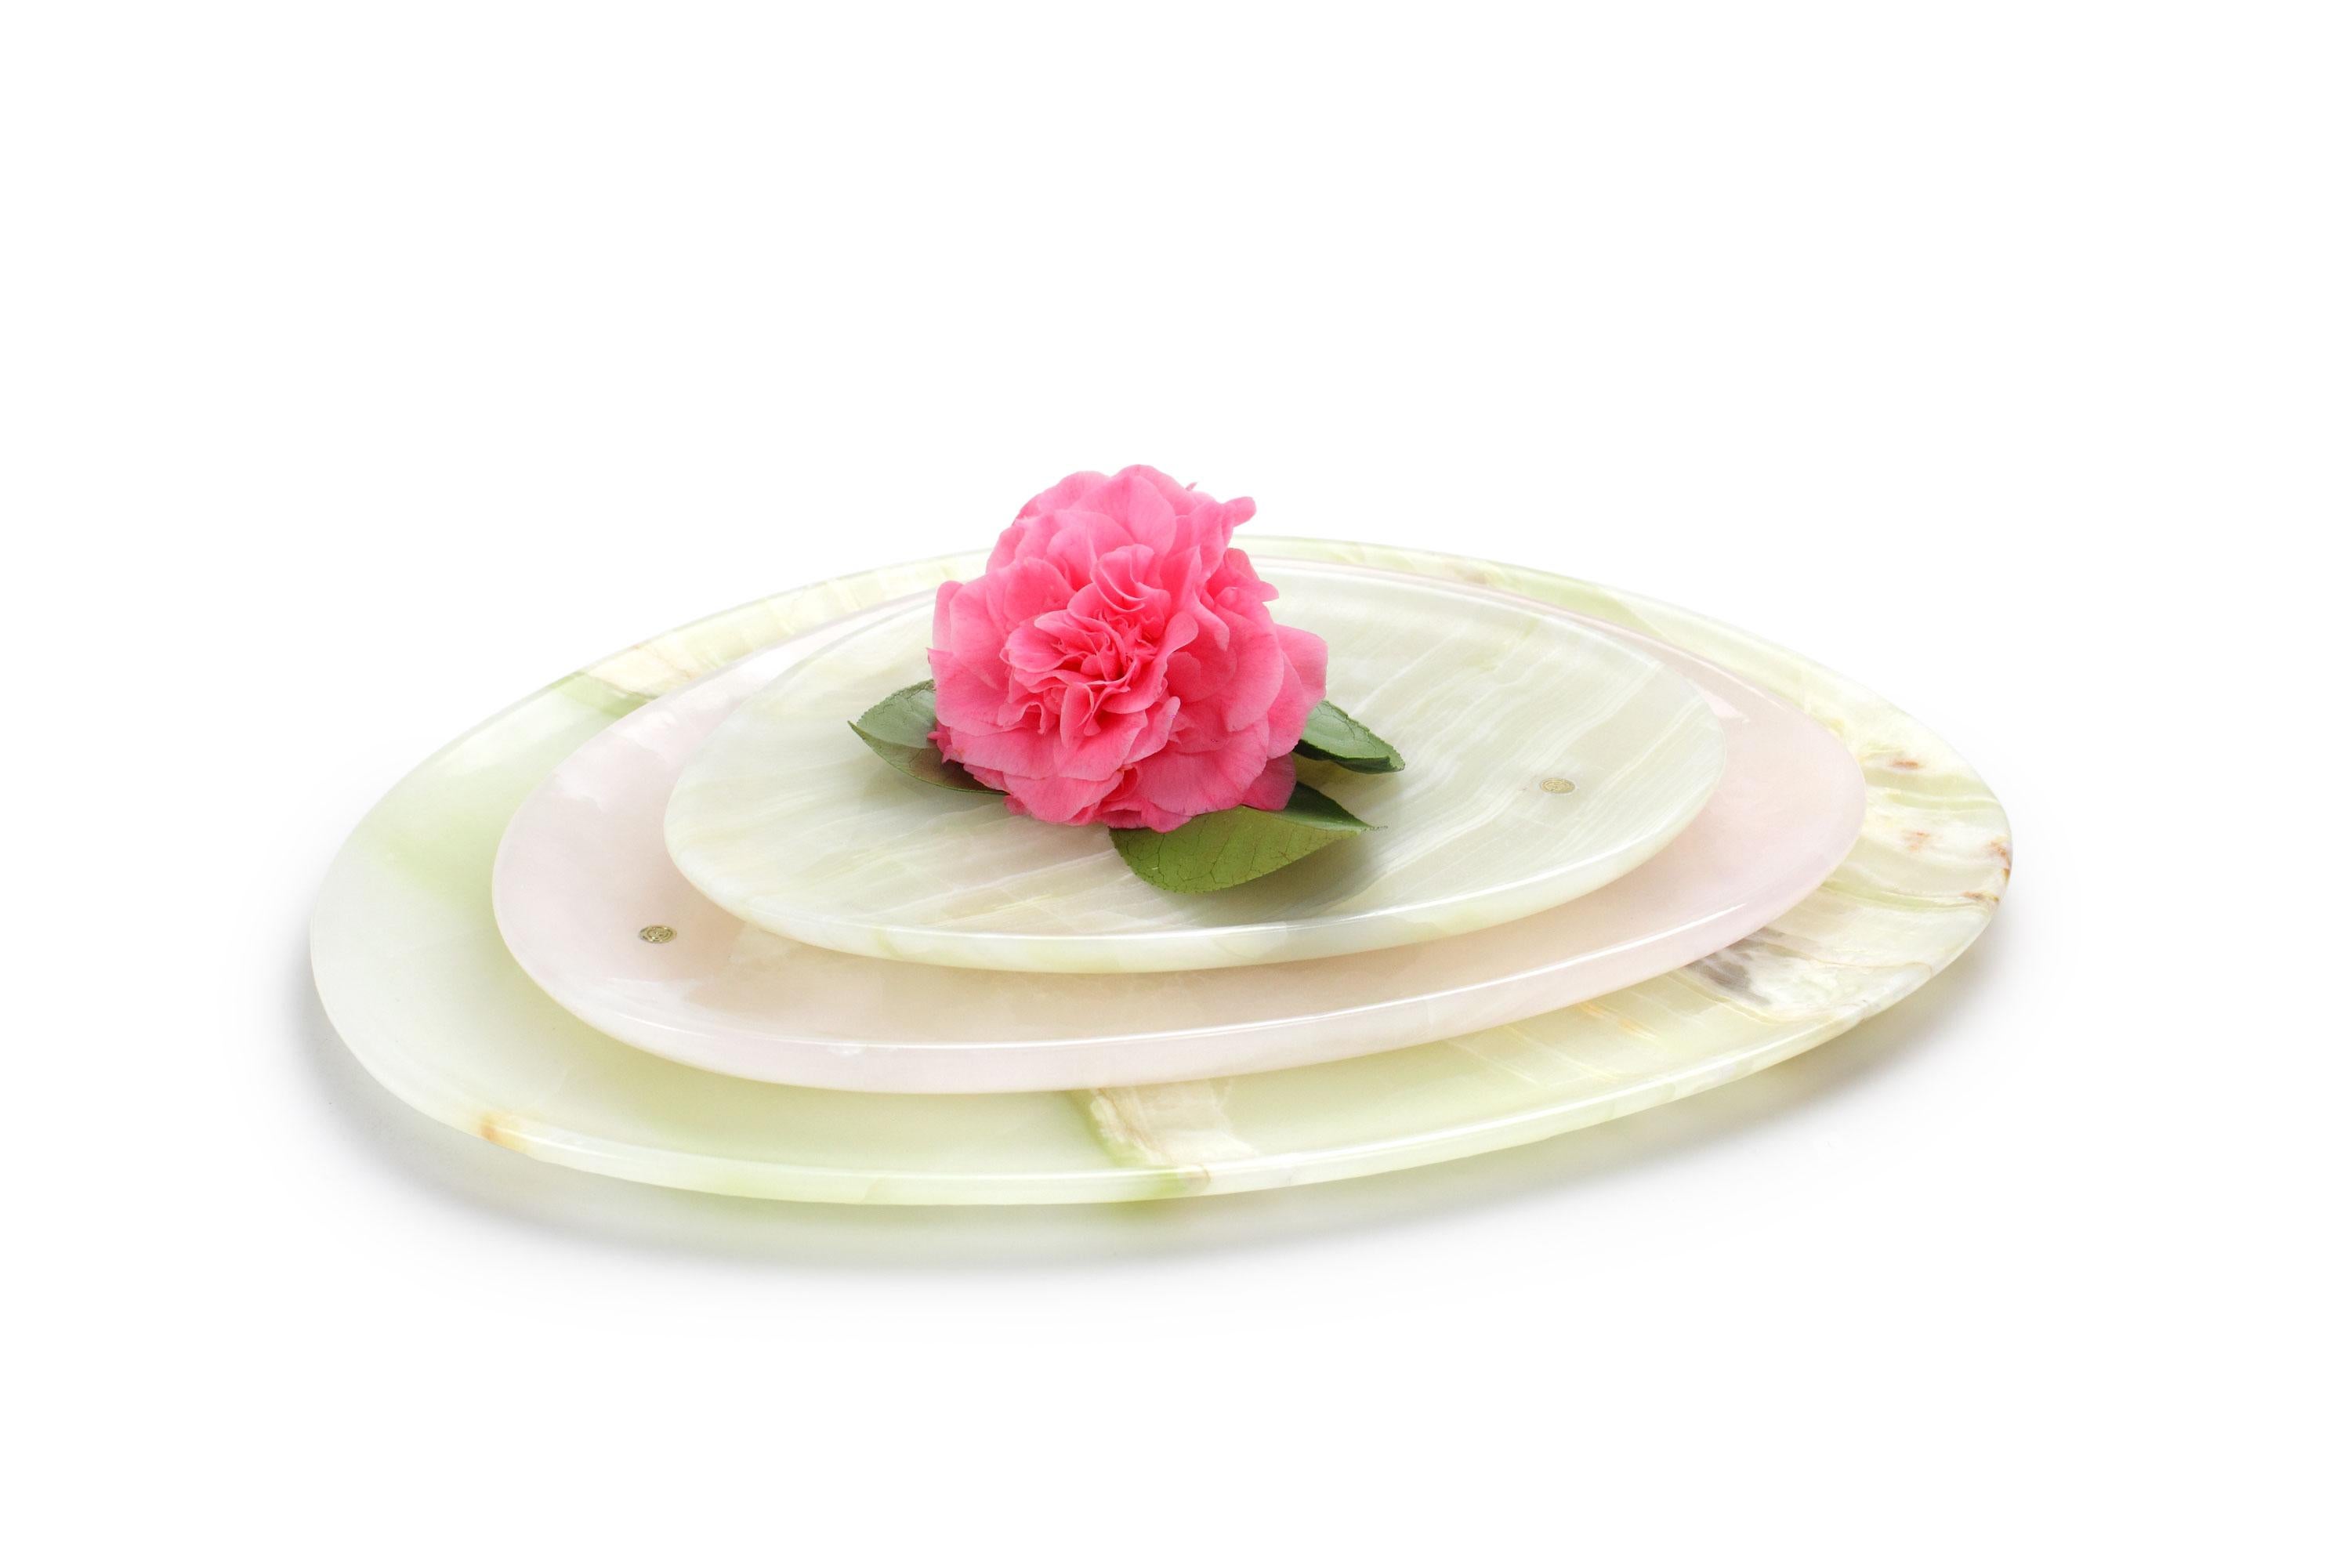 Hand carved presentation plates in green and pink onyx. 
Multiple use as plates, platters and placers. 

Dimensions: Small - L 24 W 20 H 1.8 cm, Medium - L 30 W 28 H 1.8 cm, Big - L 36 W 35 H 1.8 cm.
Available in different marbles, onyx and